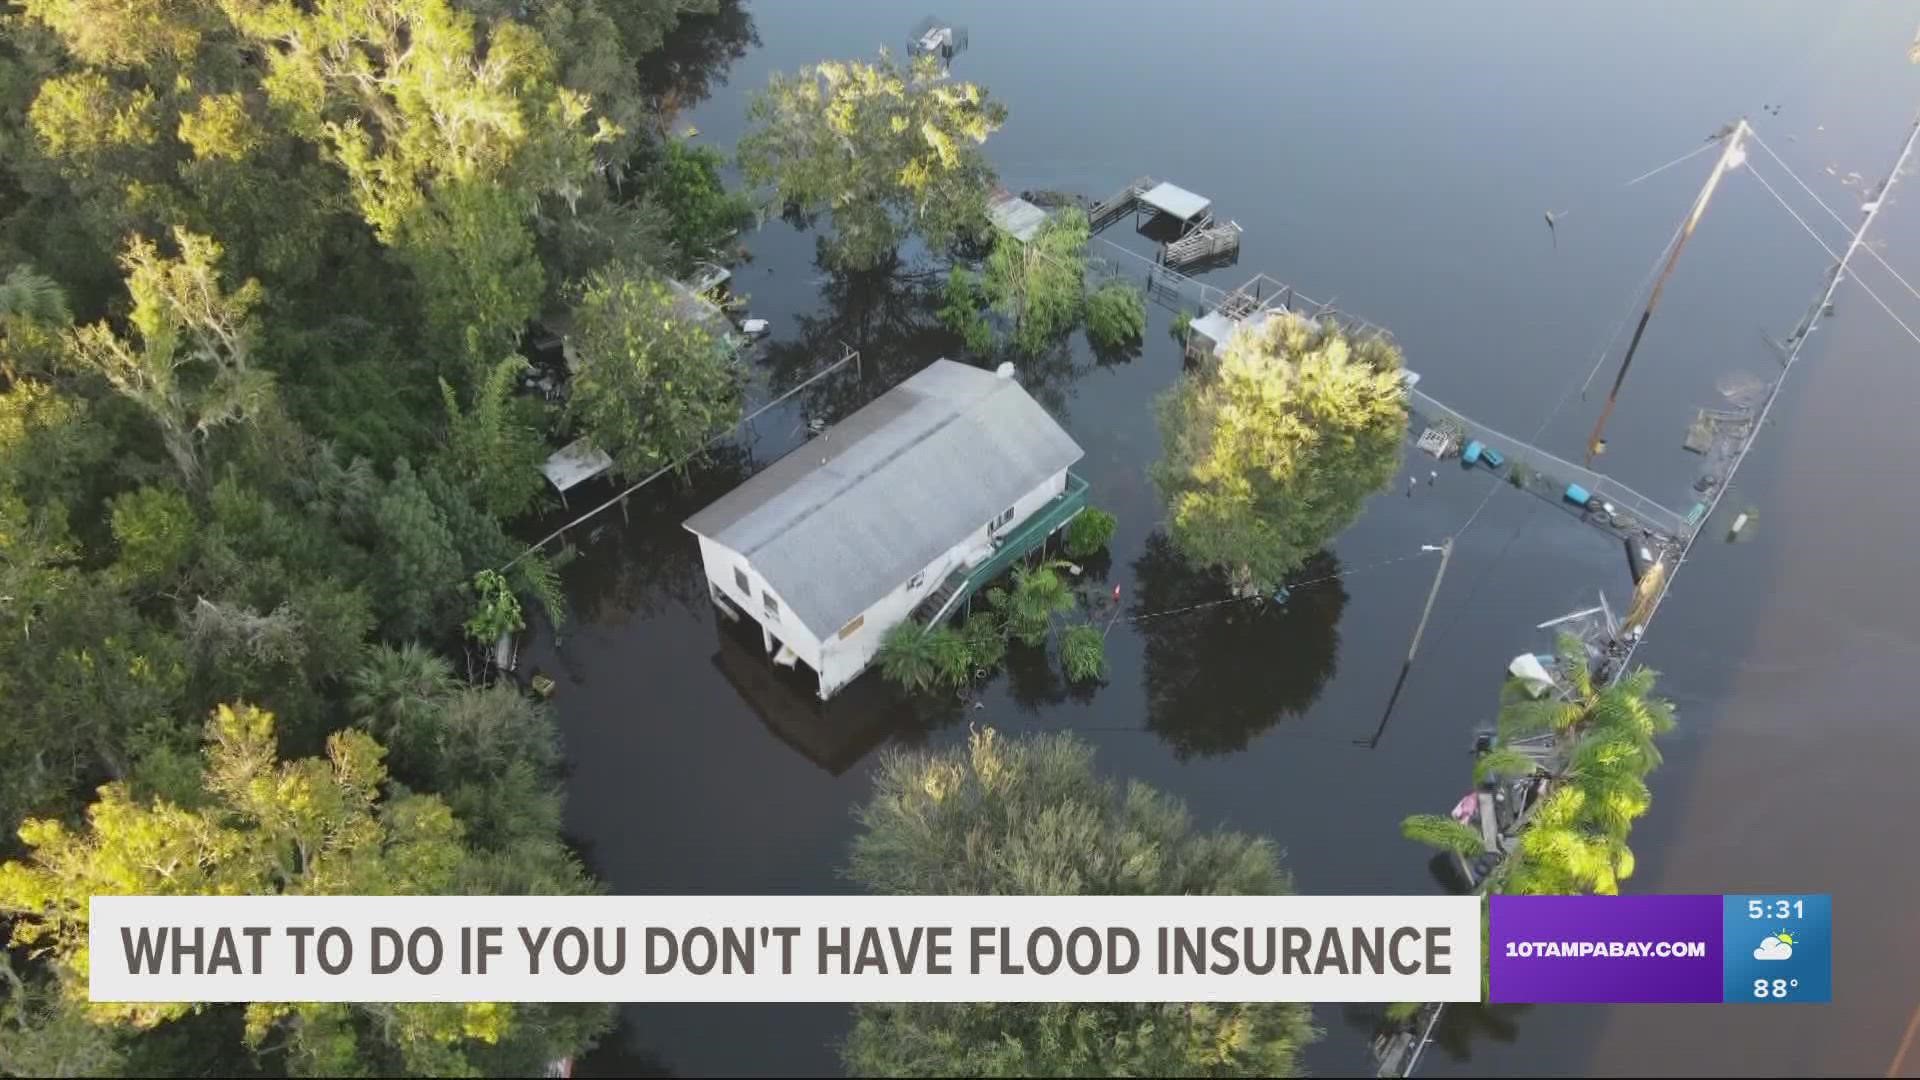 As southwest Florida continues to dry out, flooding is causing major headaches on the insurance front for thousands of Floridians with water damage.